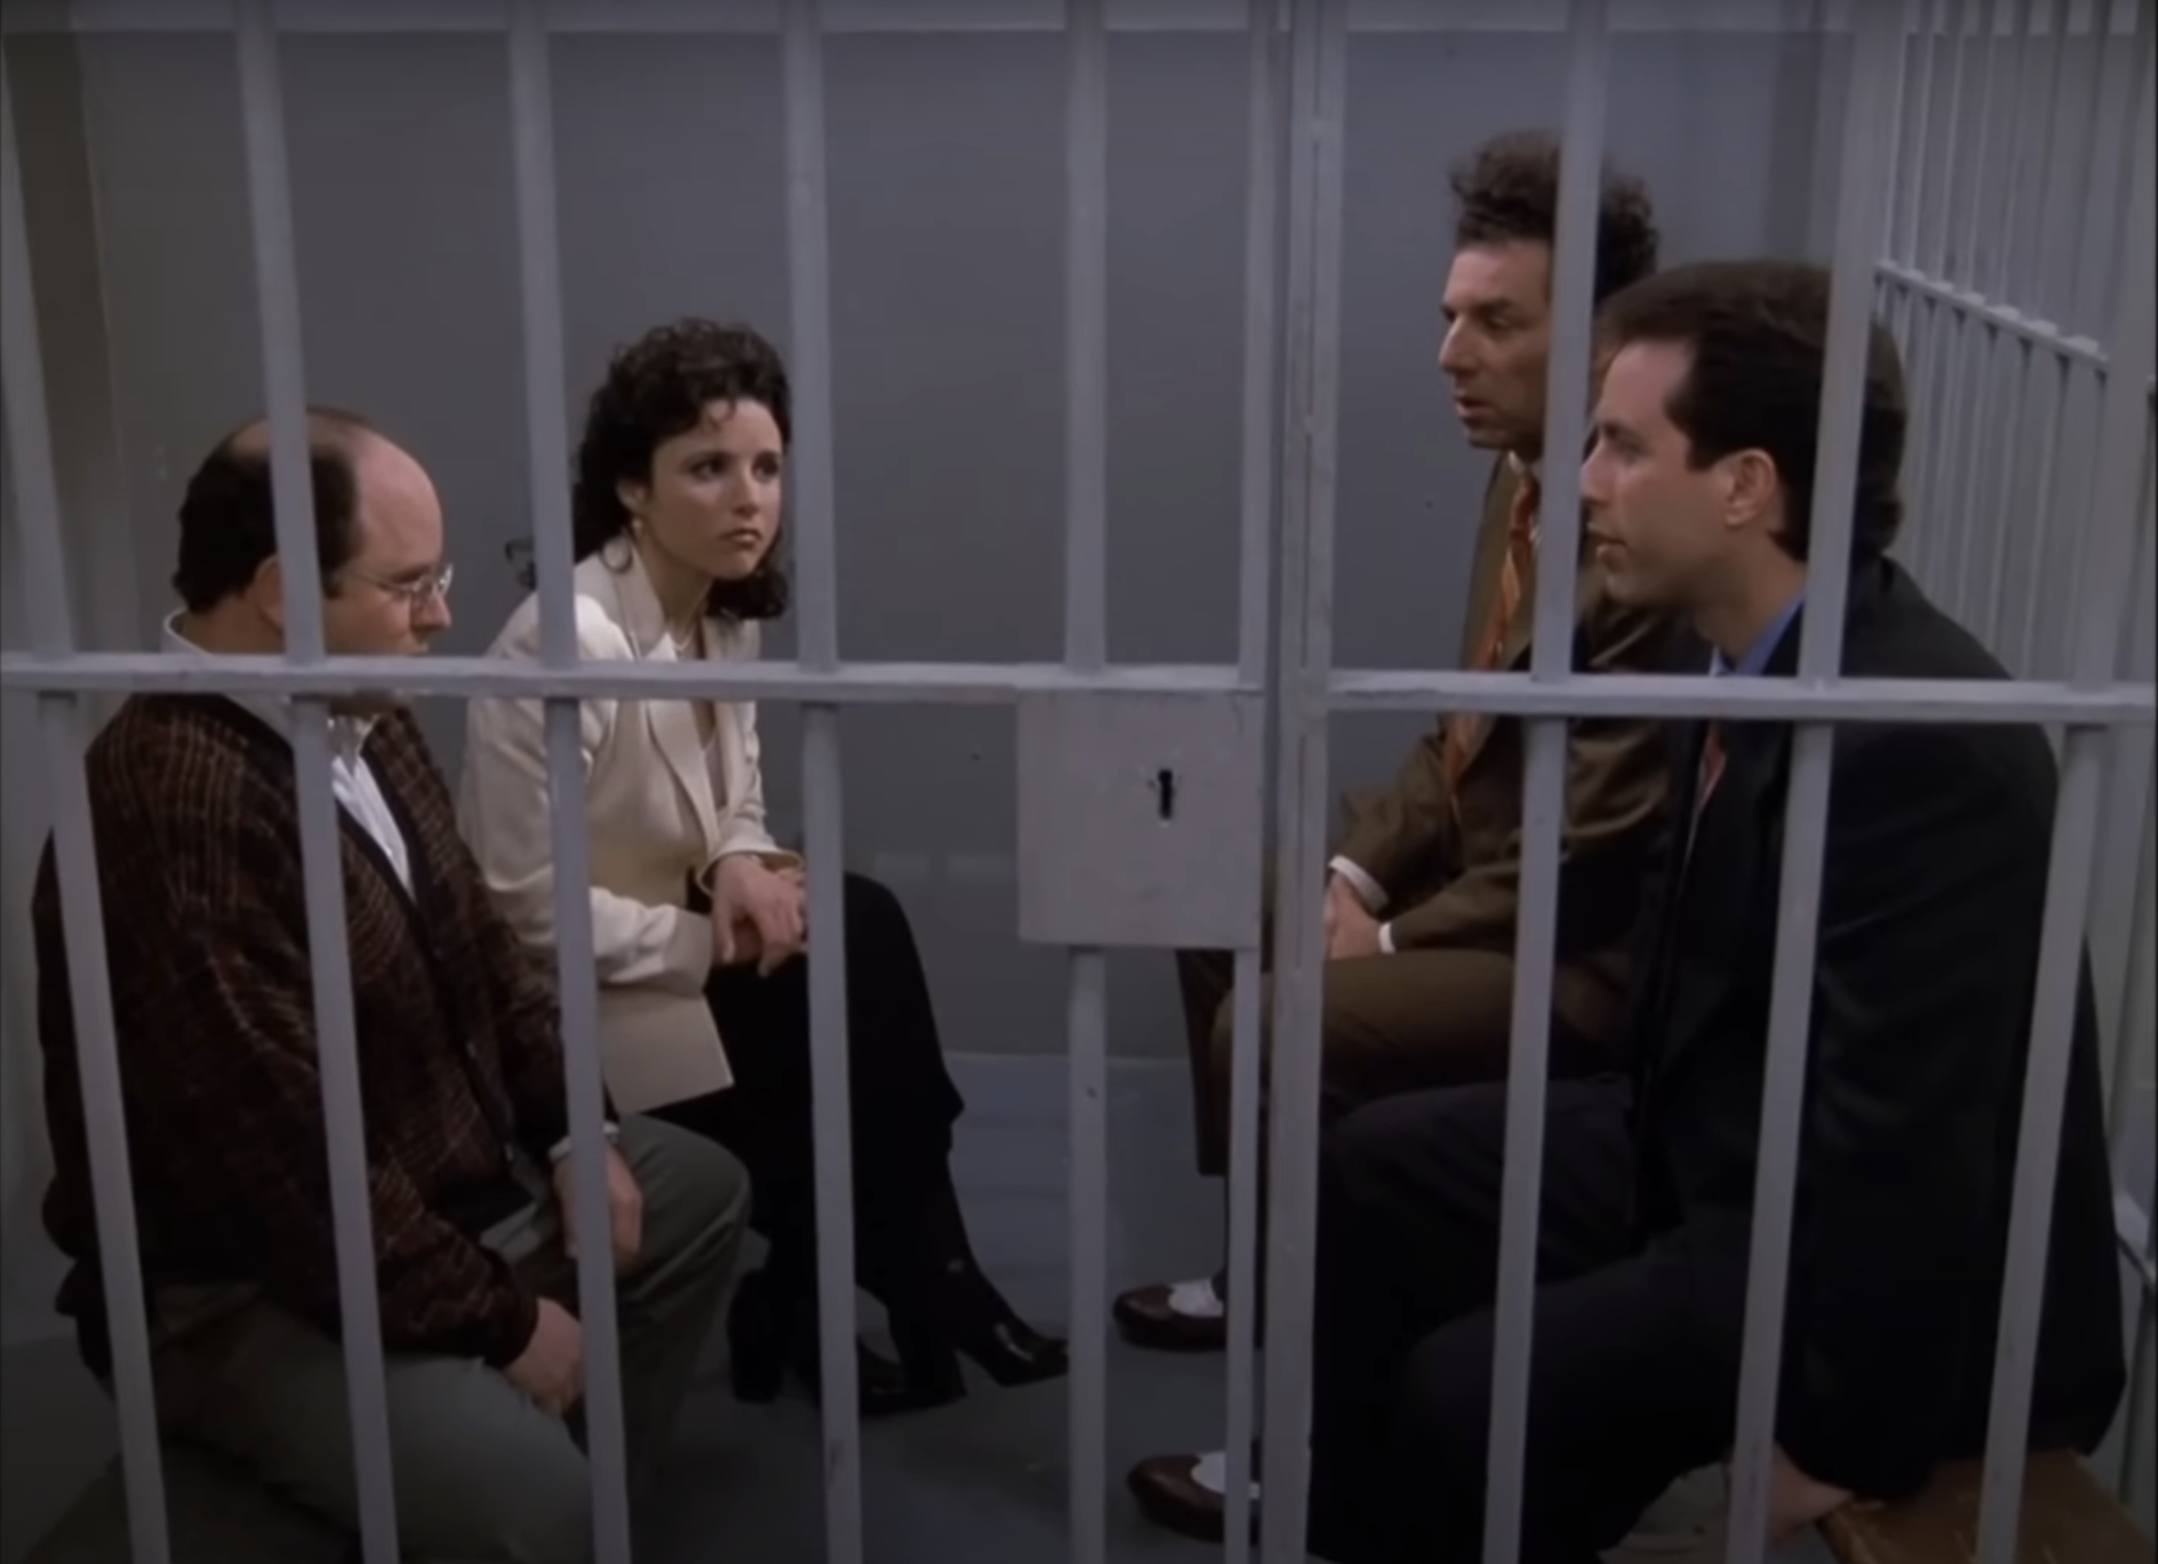 Four characters from &quot;Seinfeld&quot; sit in a jail cell, with expressions ranging from concerned to indifferent